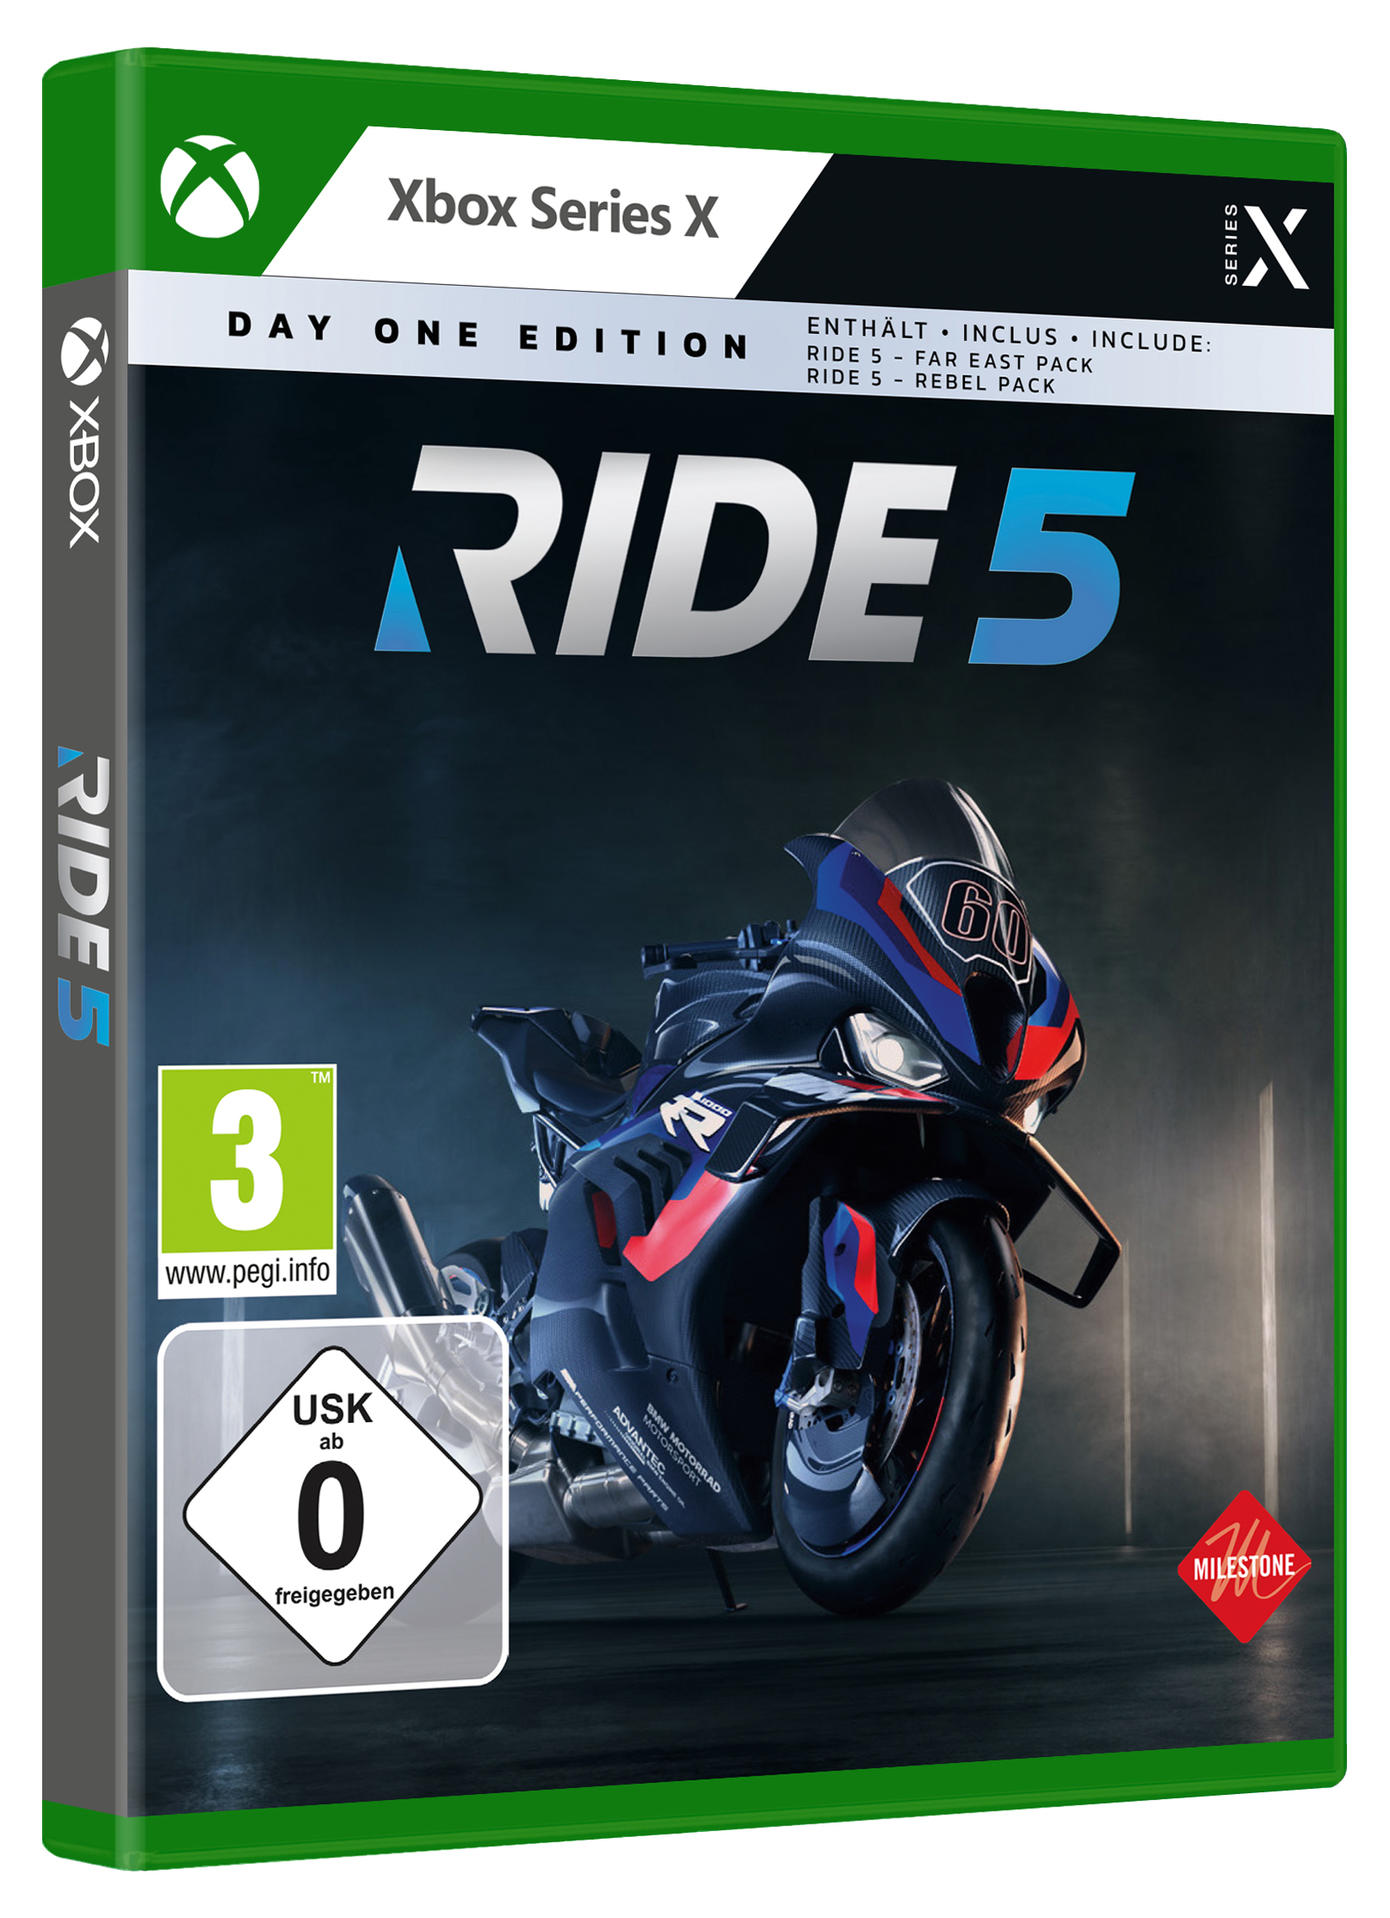 One 5 [Xbox - X] RIDE Edition Series Day